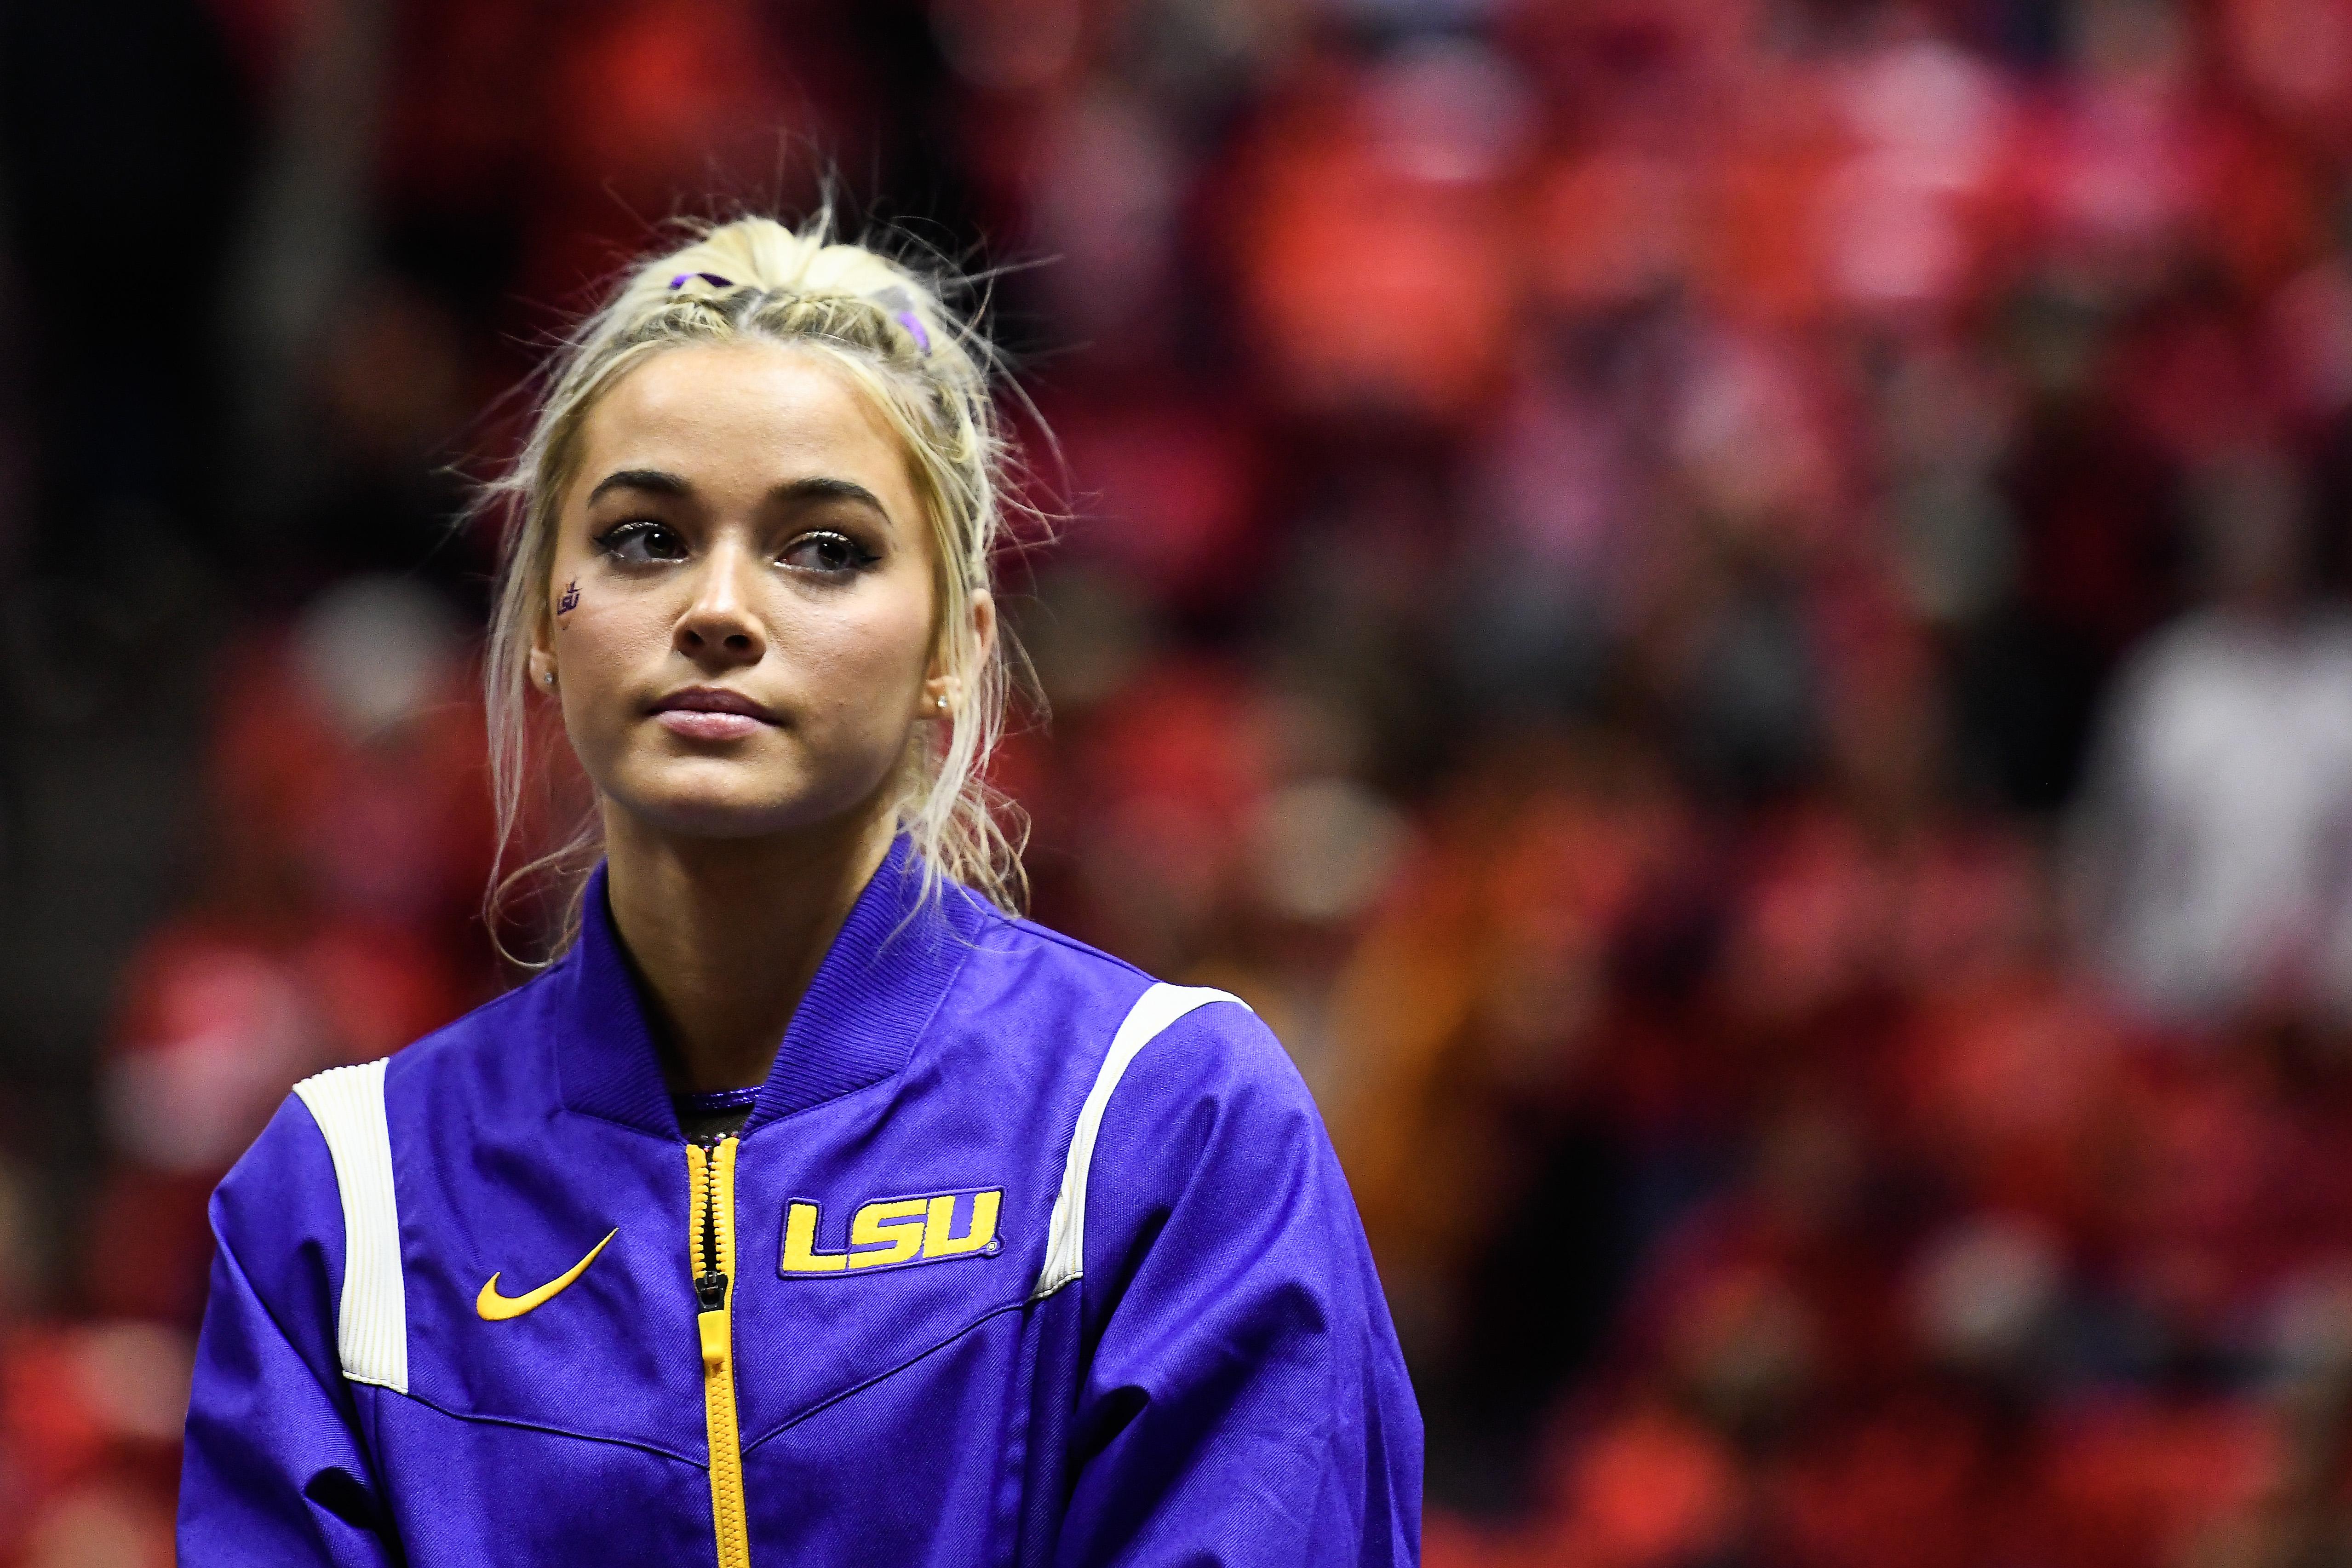 Olivia Dunne, LSU gymnastics and TikTok star, and her disconcerting teen boy fans, explained. photo picture